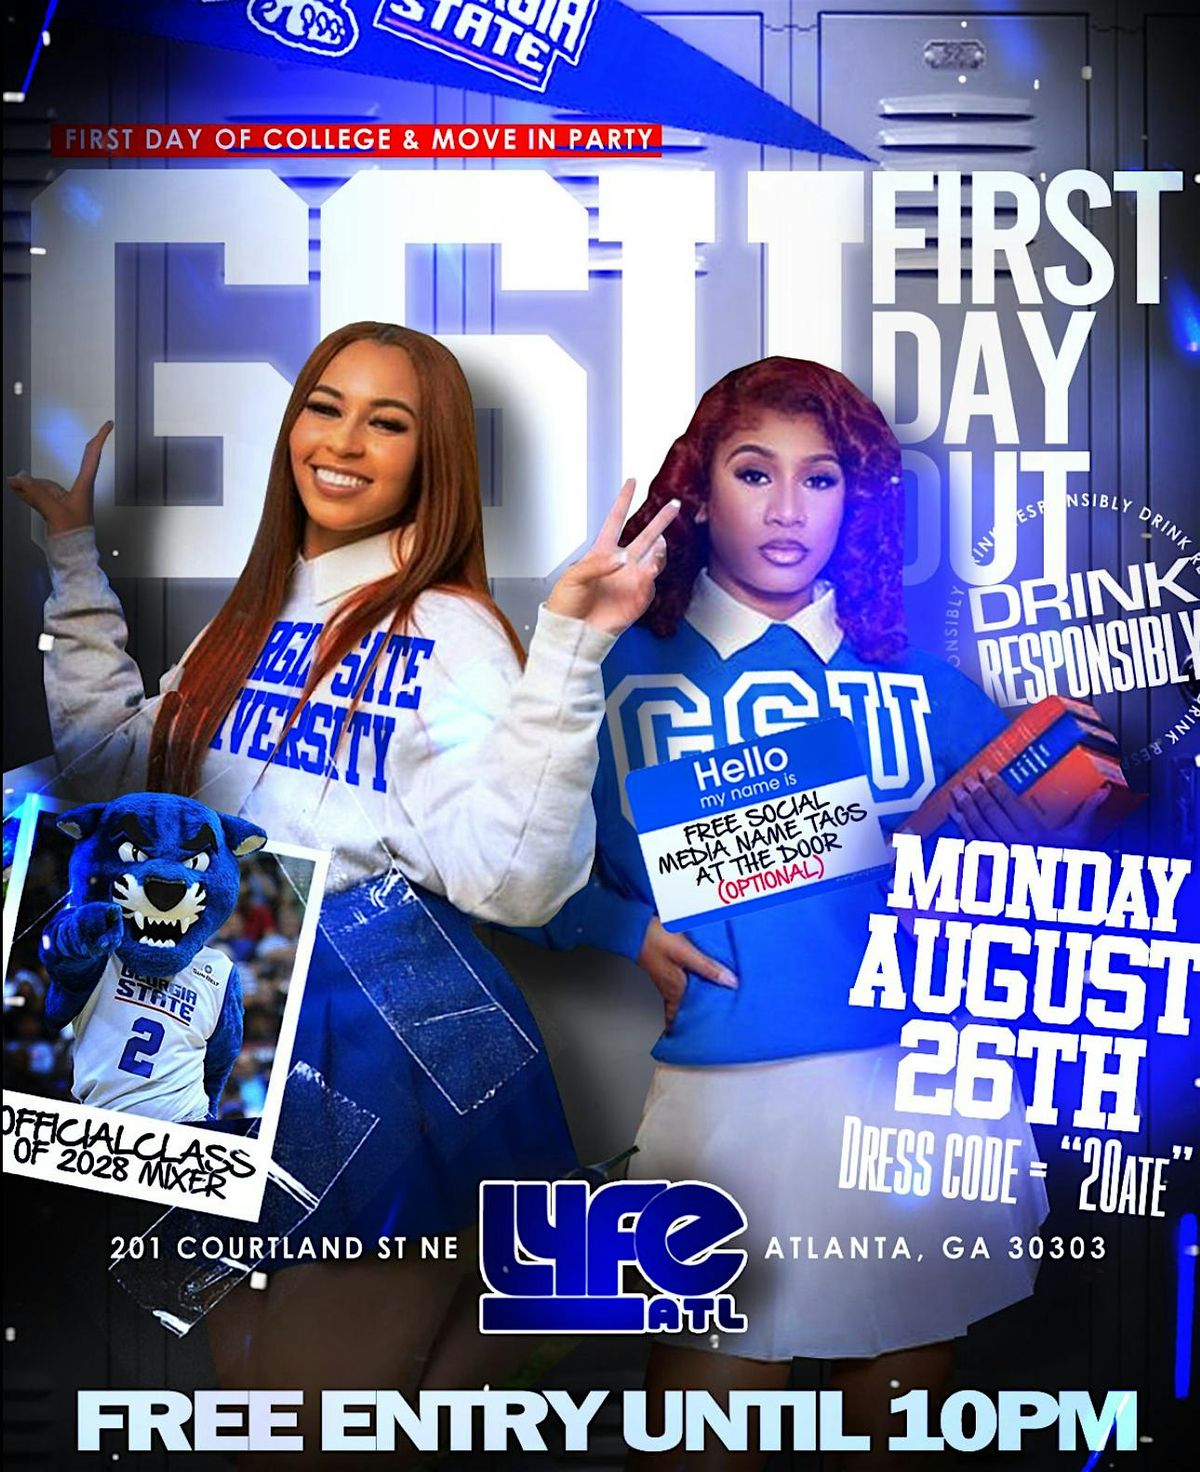 GSU FIRST DAY OUT [FIRST DAY & MOVE IN PARTY]